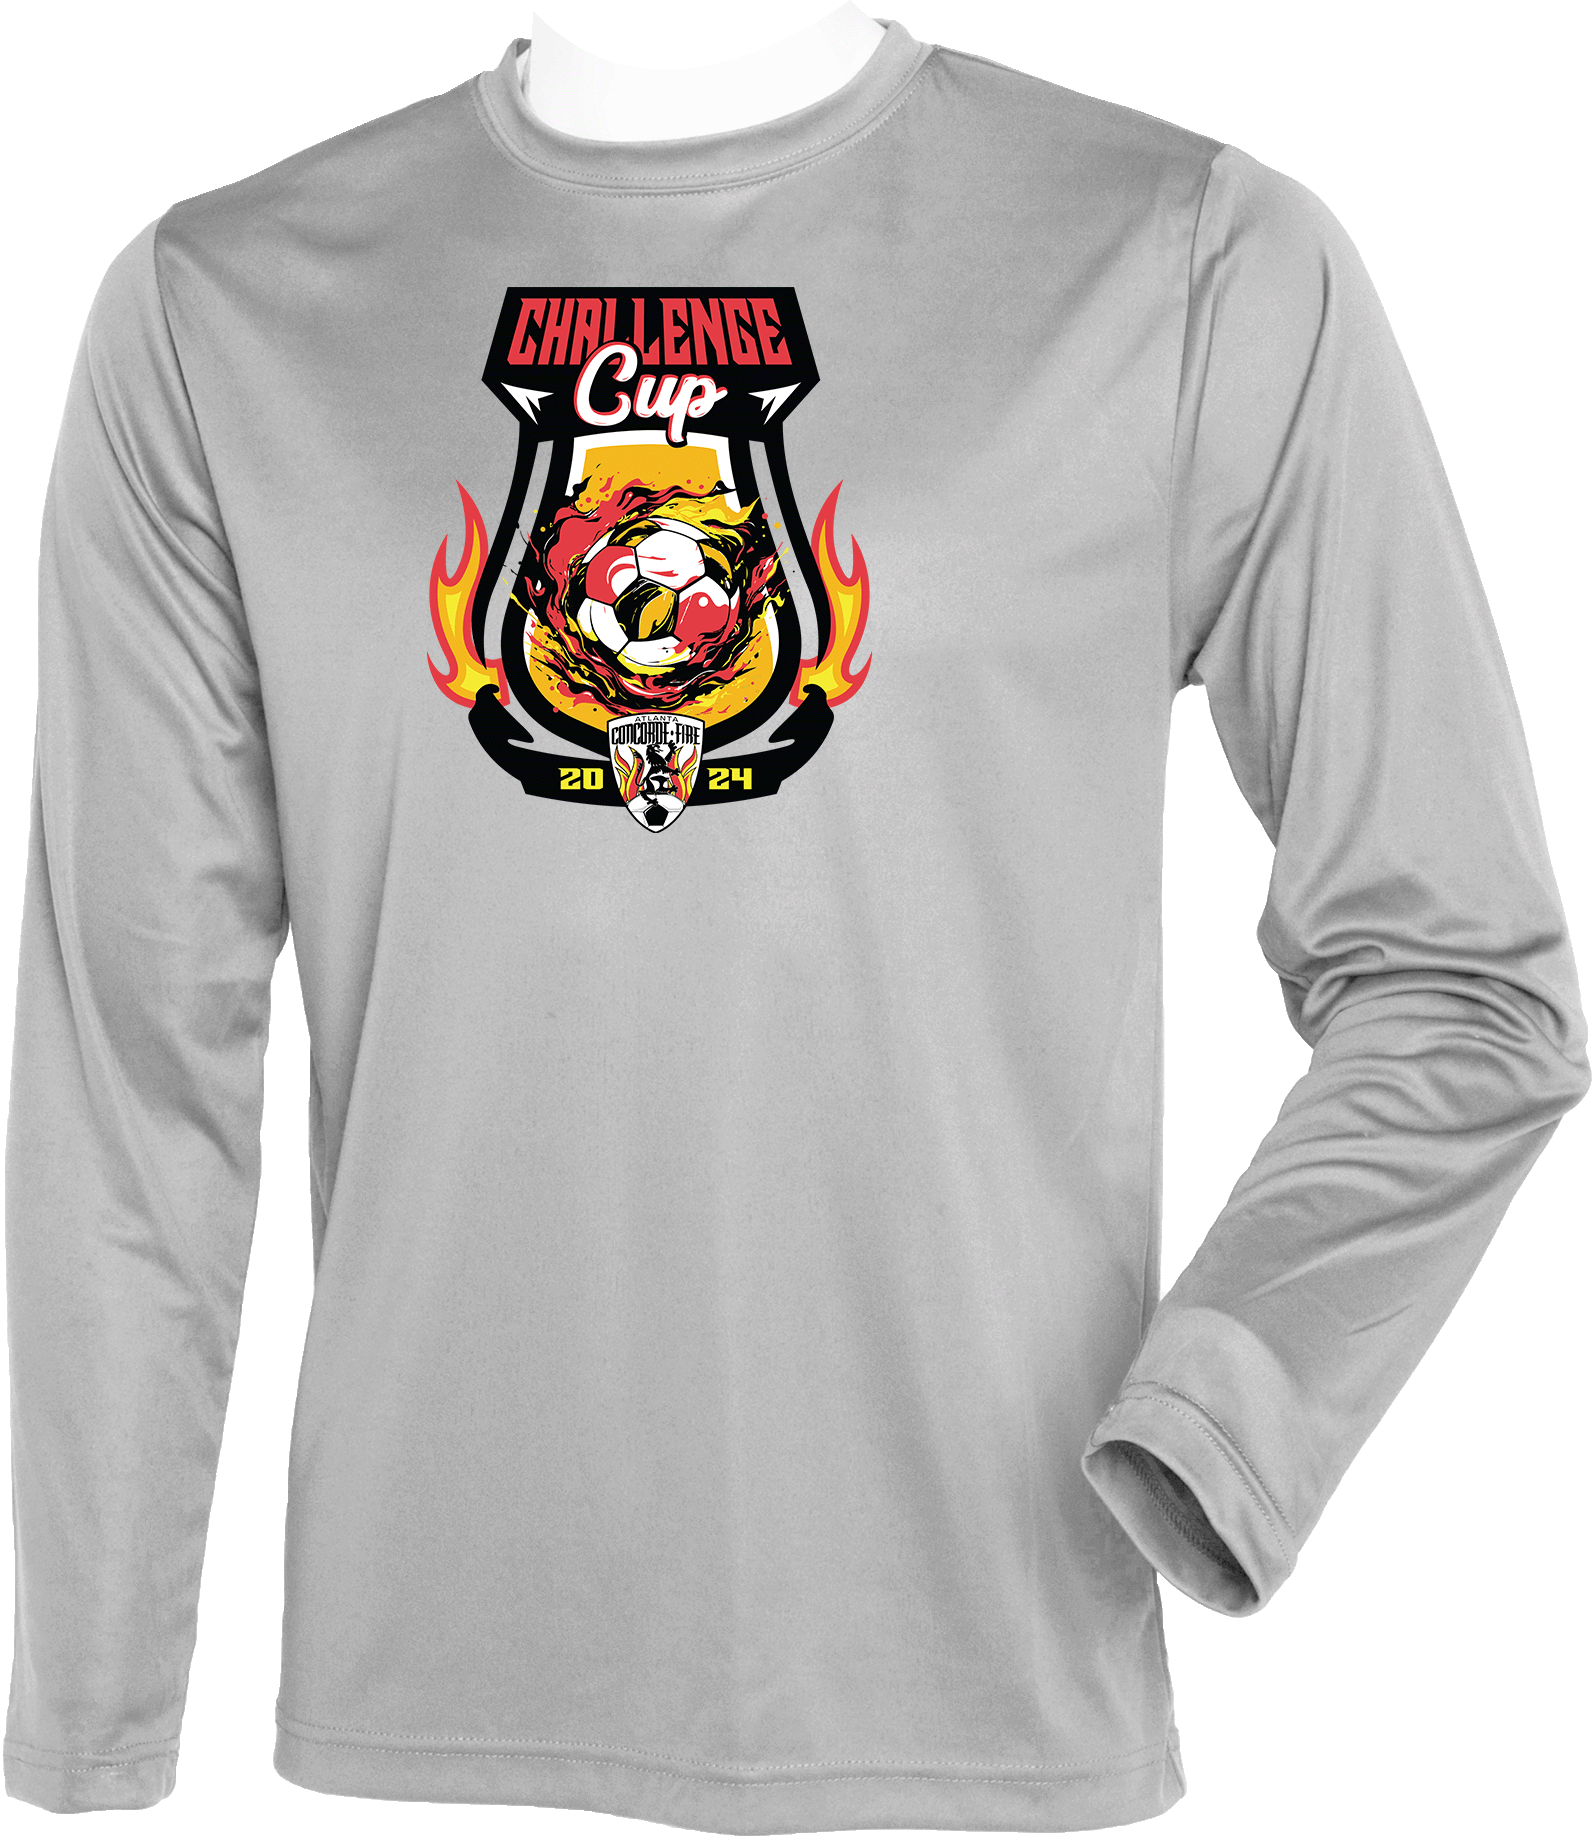 Performance Shirts - 2024 Challenge Cup